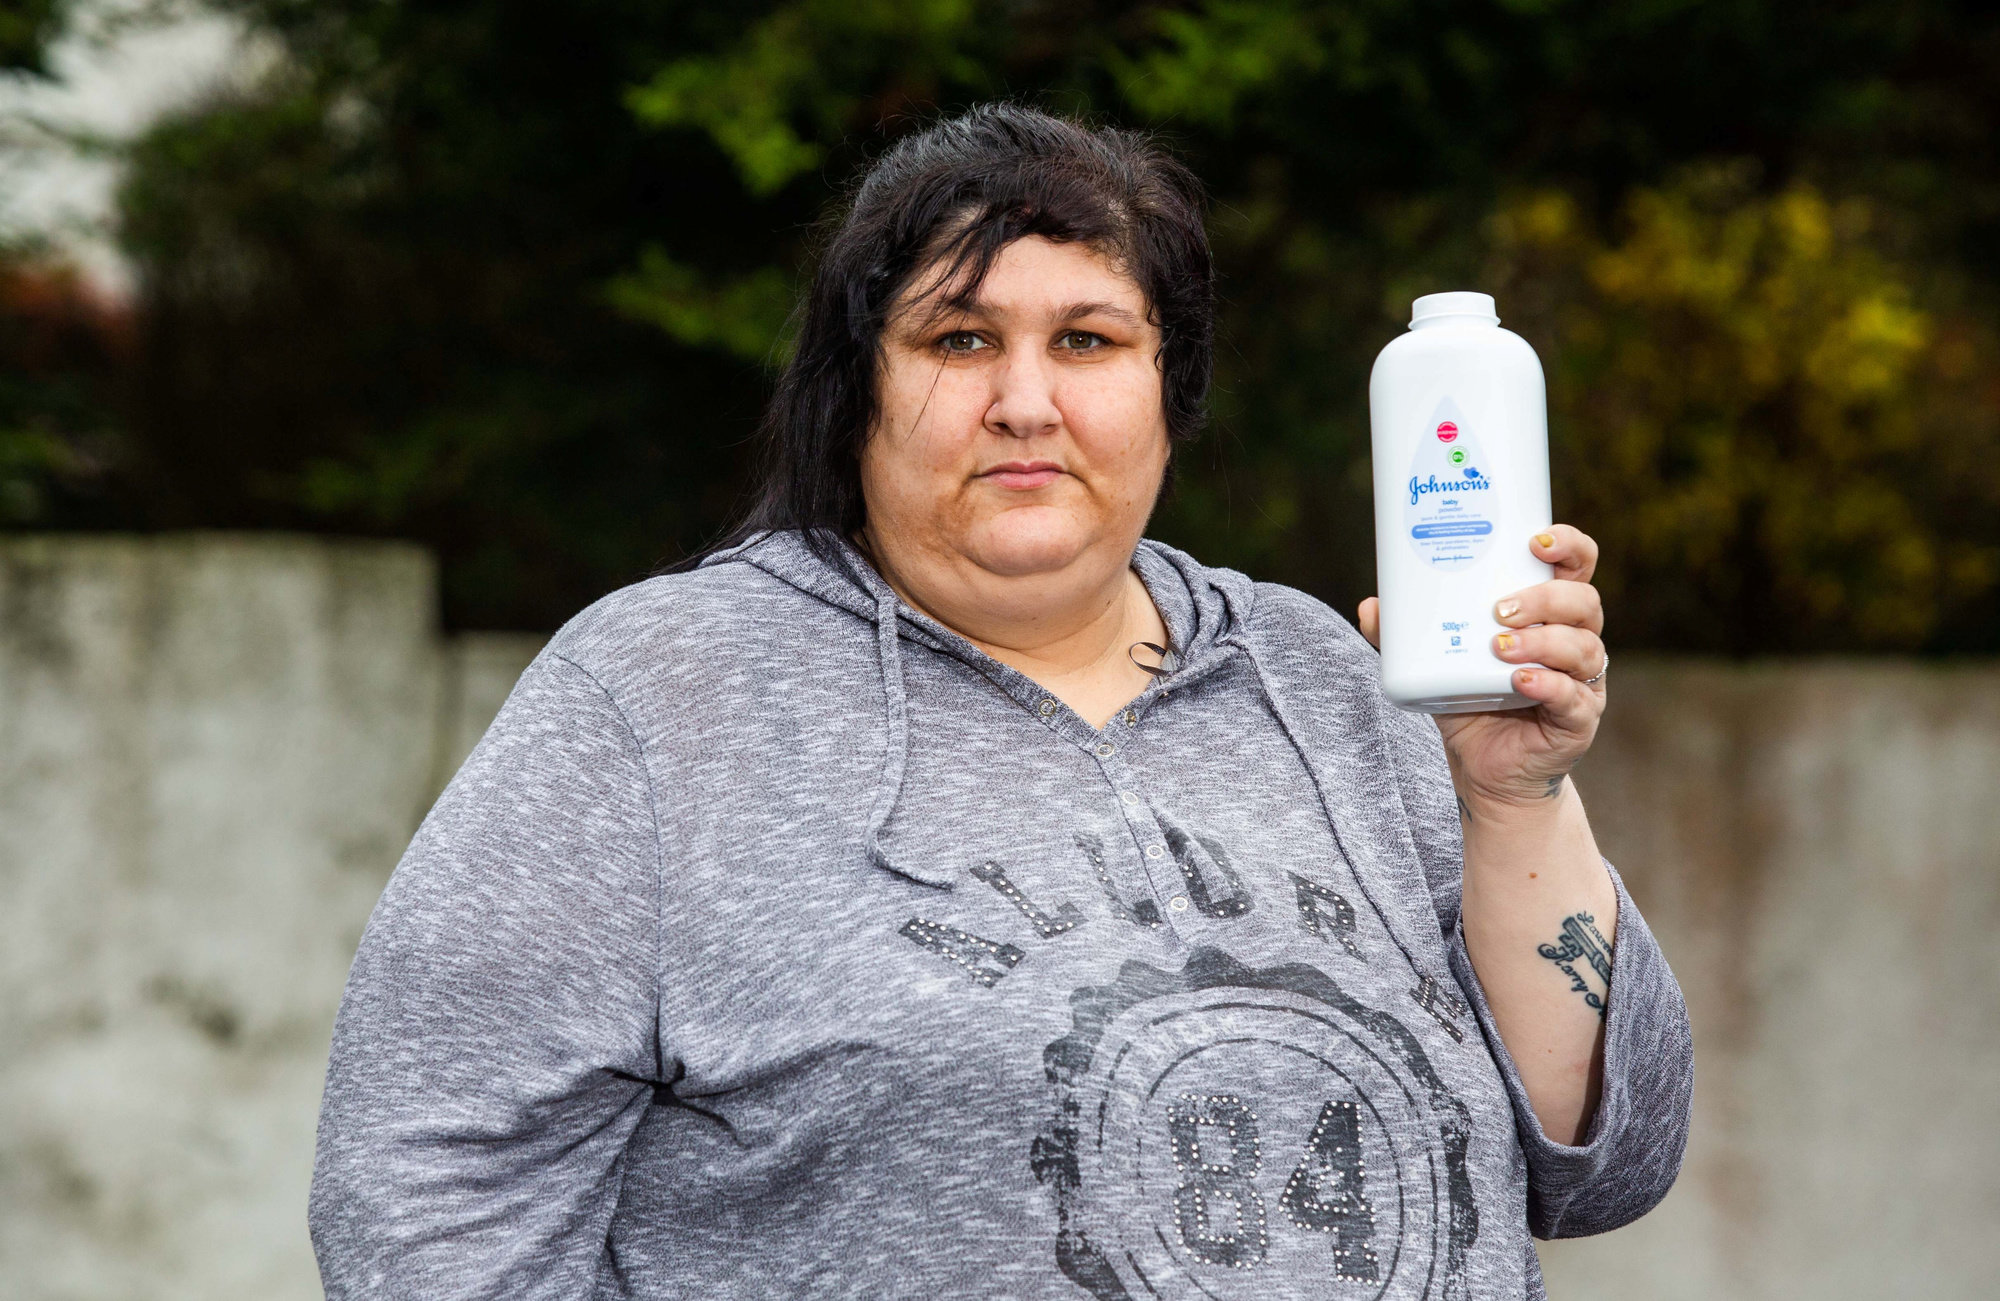 Woman Addicted to Eating Baby Powder Shares Her Story 